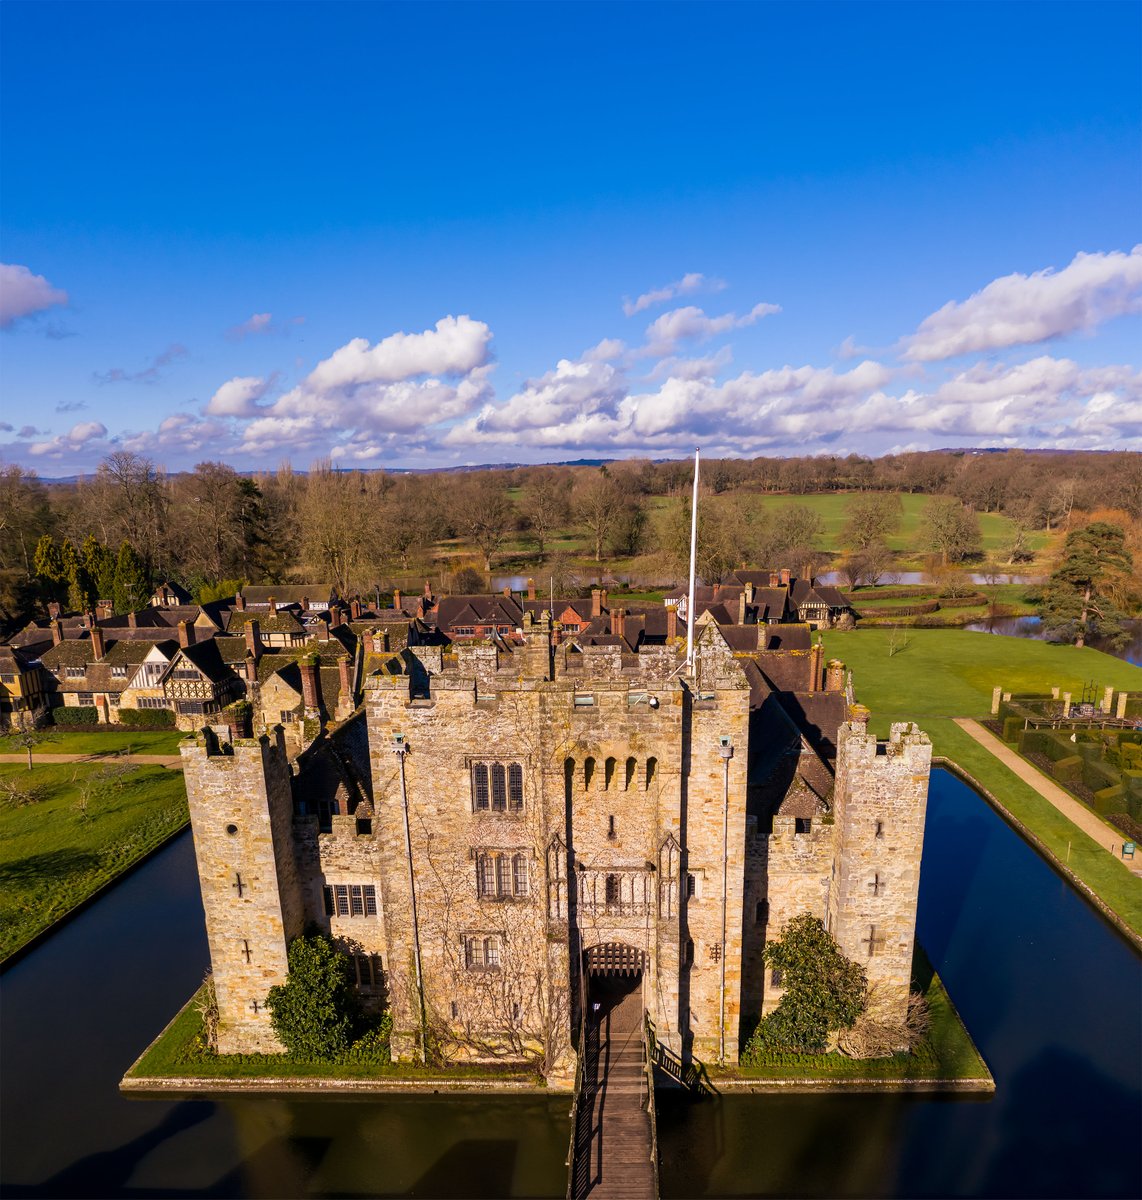 Would you like to work at Hever Castle? 

We are recruiting for a Visitor Services Assistant in our Information Centre.

Discover more here: bit.ly/JobsatHever

#JobsInKent #KentJobs #NewJob #Kent #HeverCastle